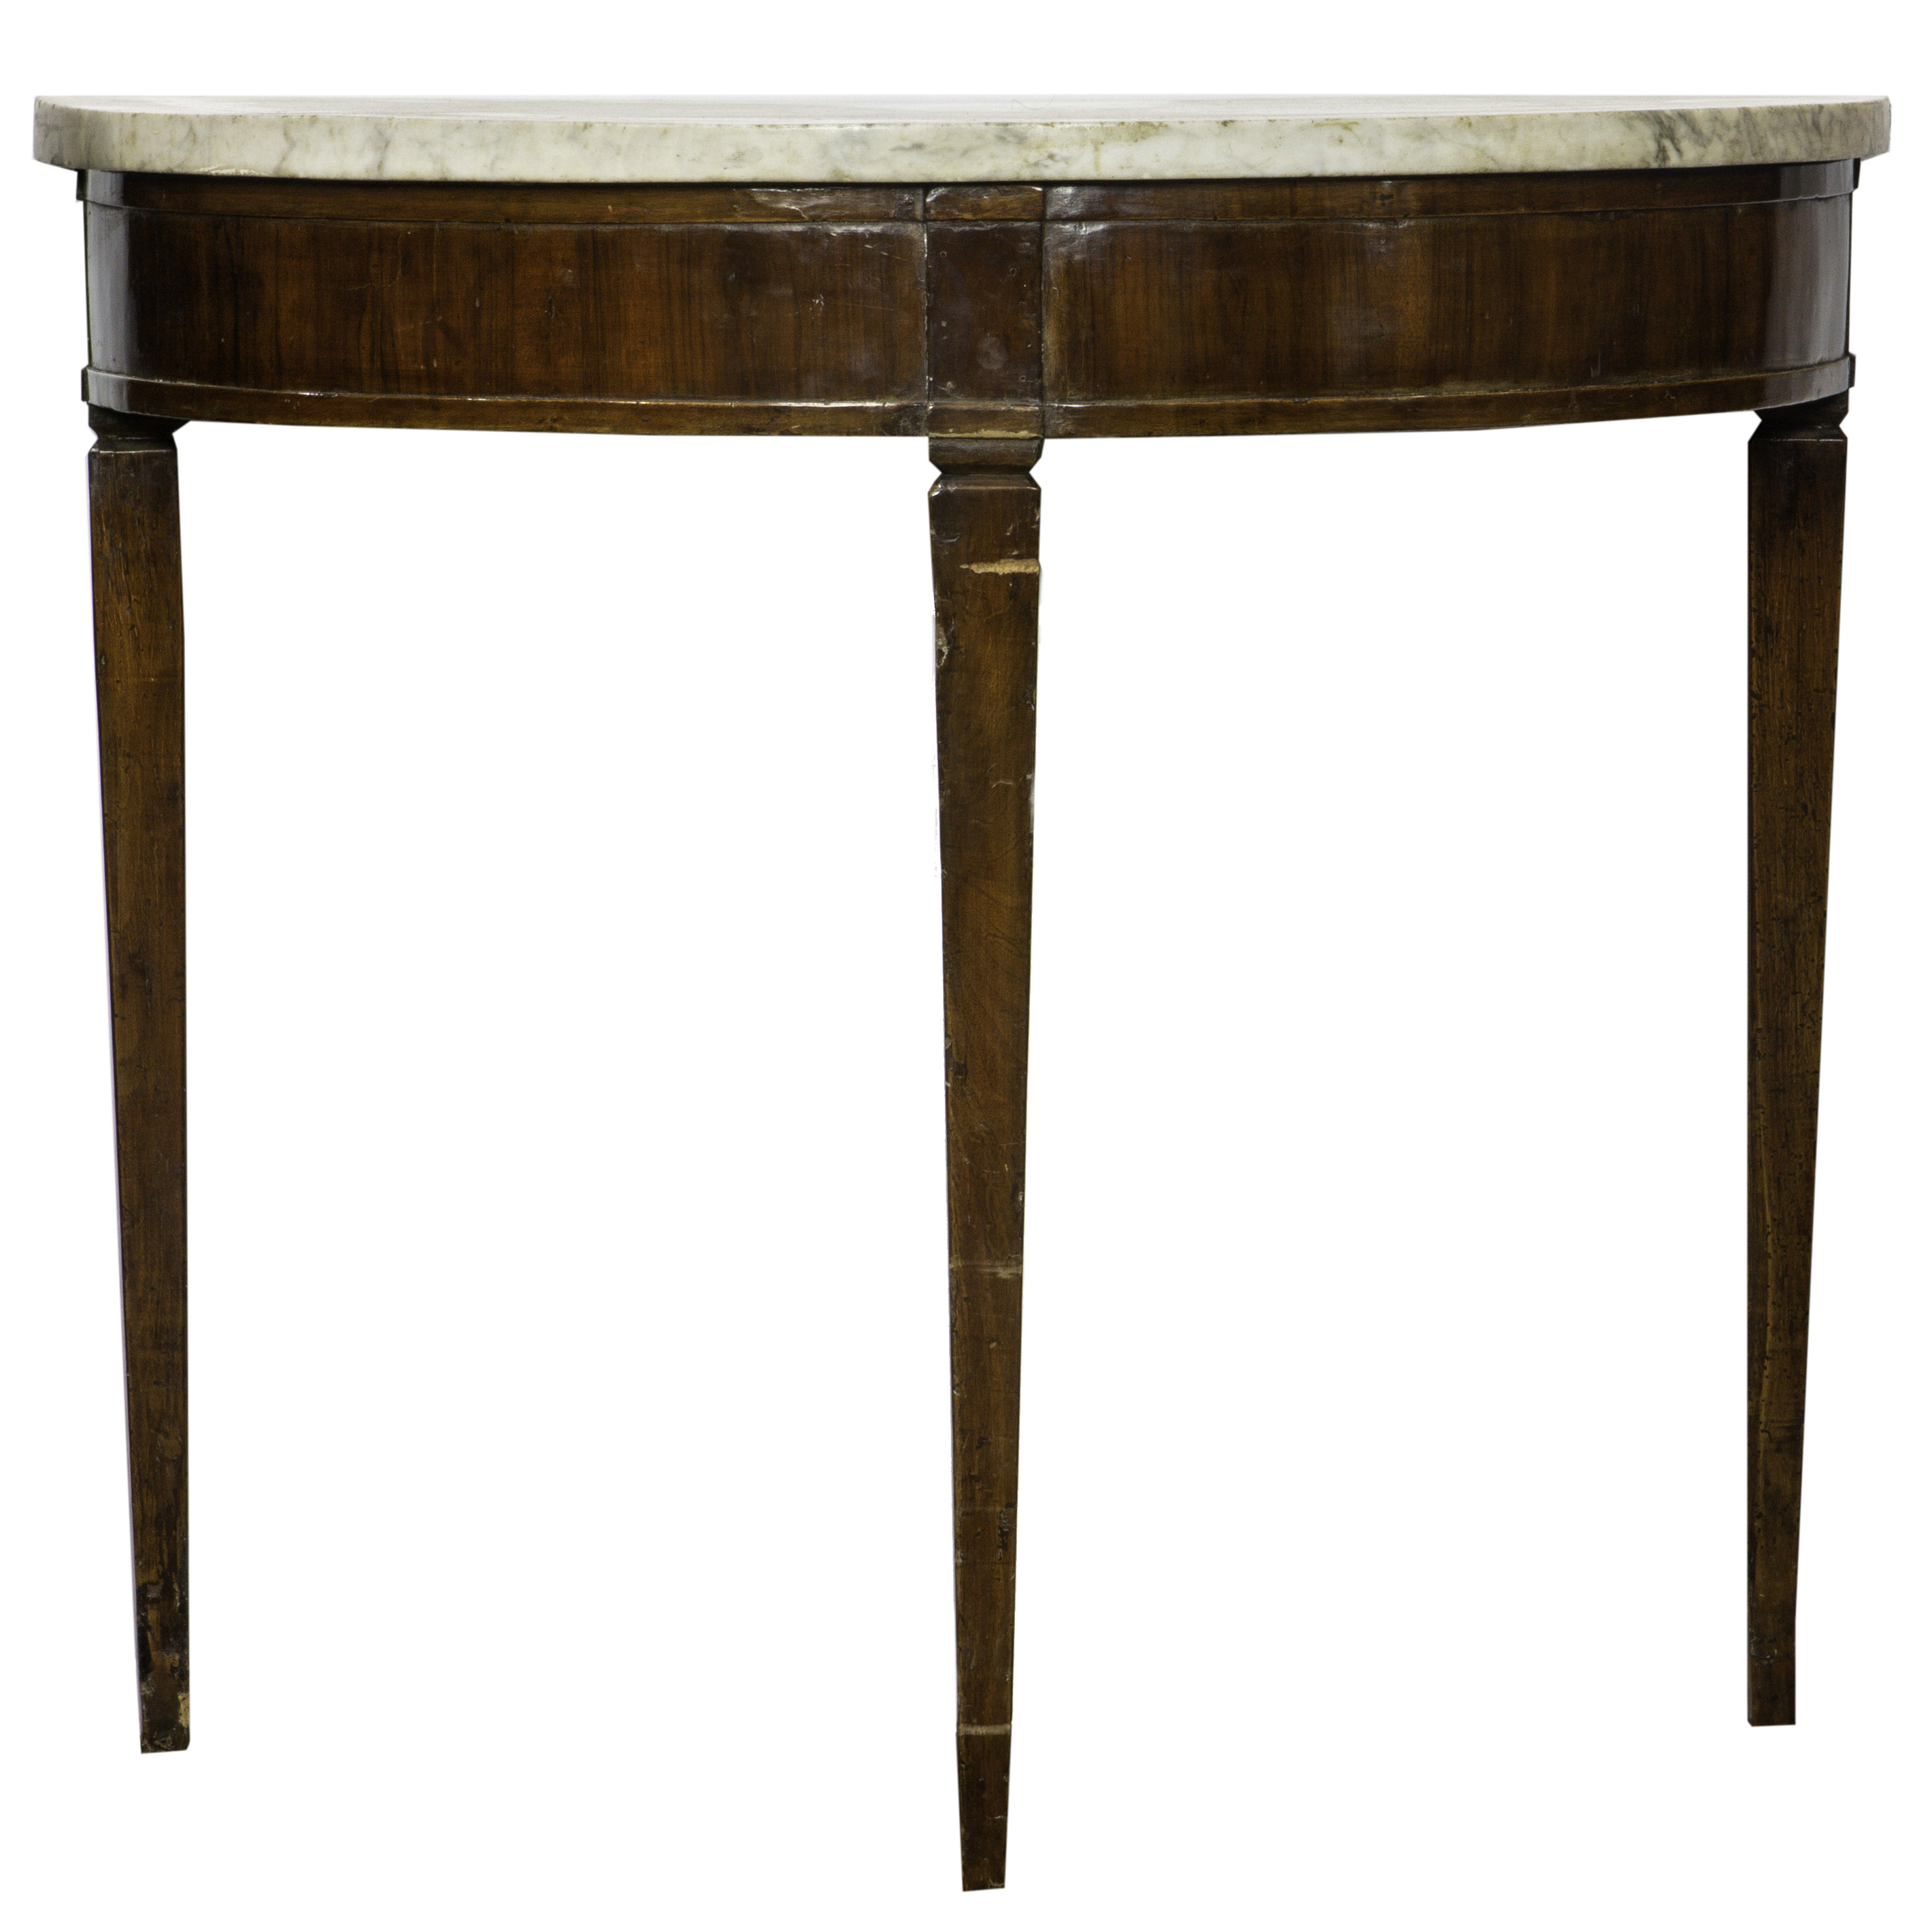 A FRENCH NEOCLASSICAL STYLE CONSOLE 3a46b8